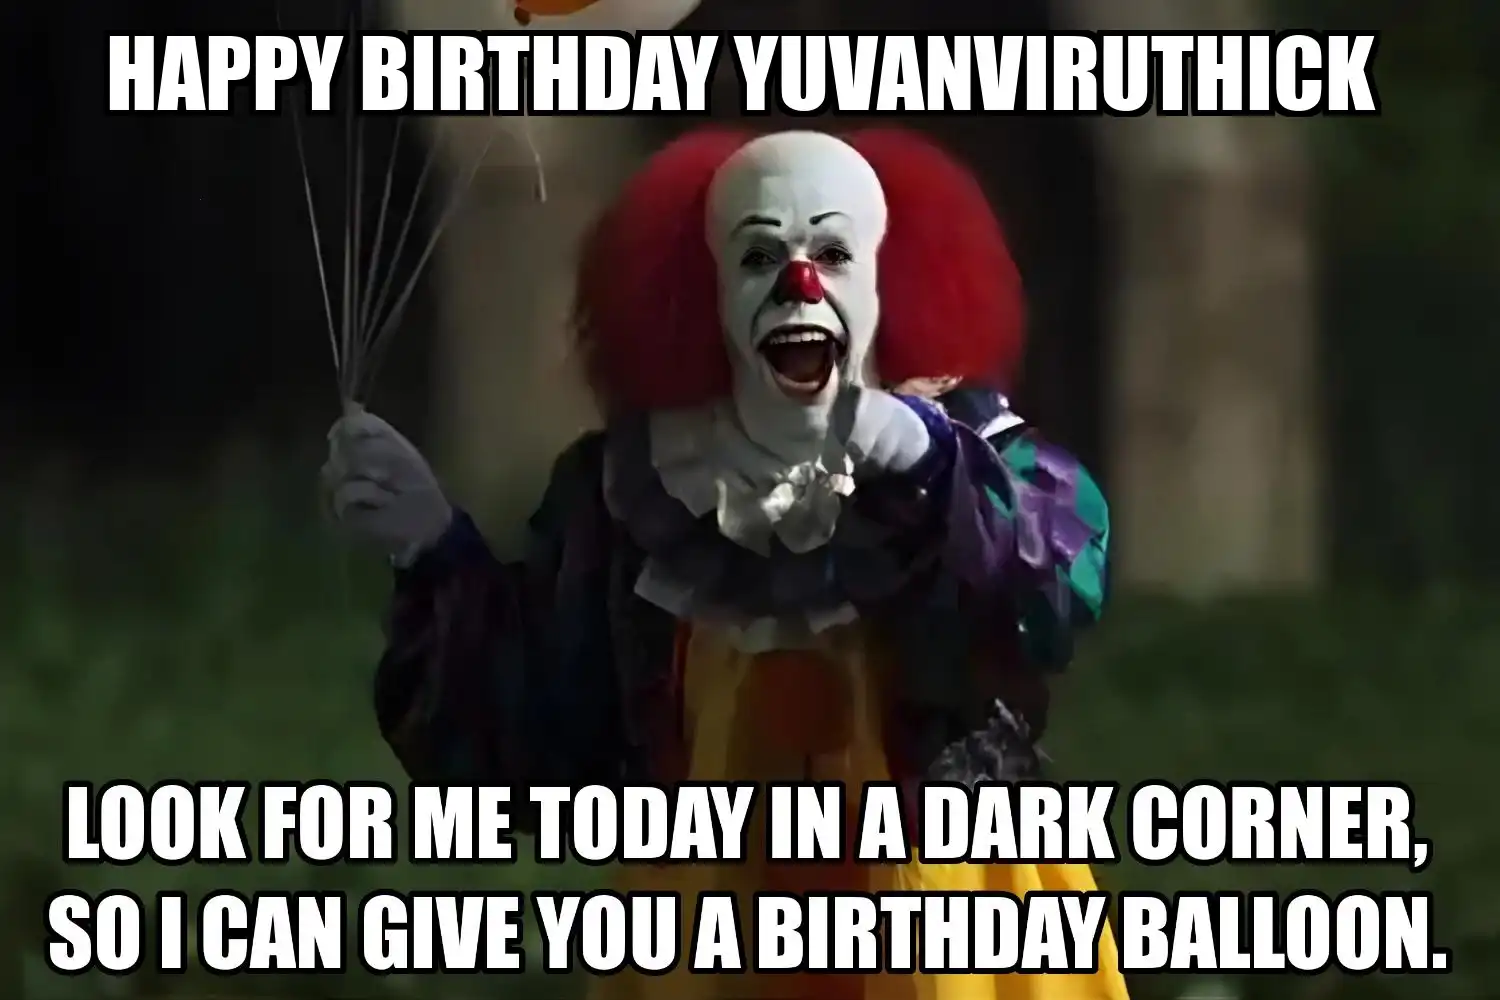 Happy Birthday Yuvanviruthick I Can Give You A Balloon Meme